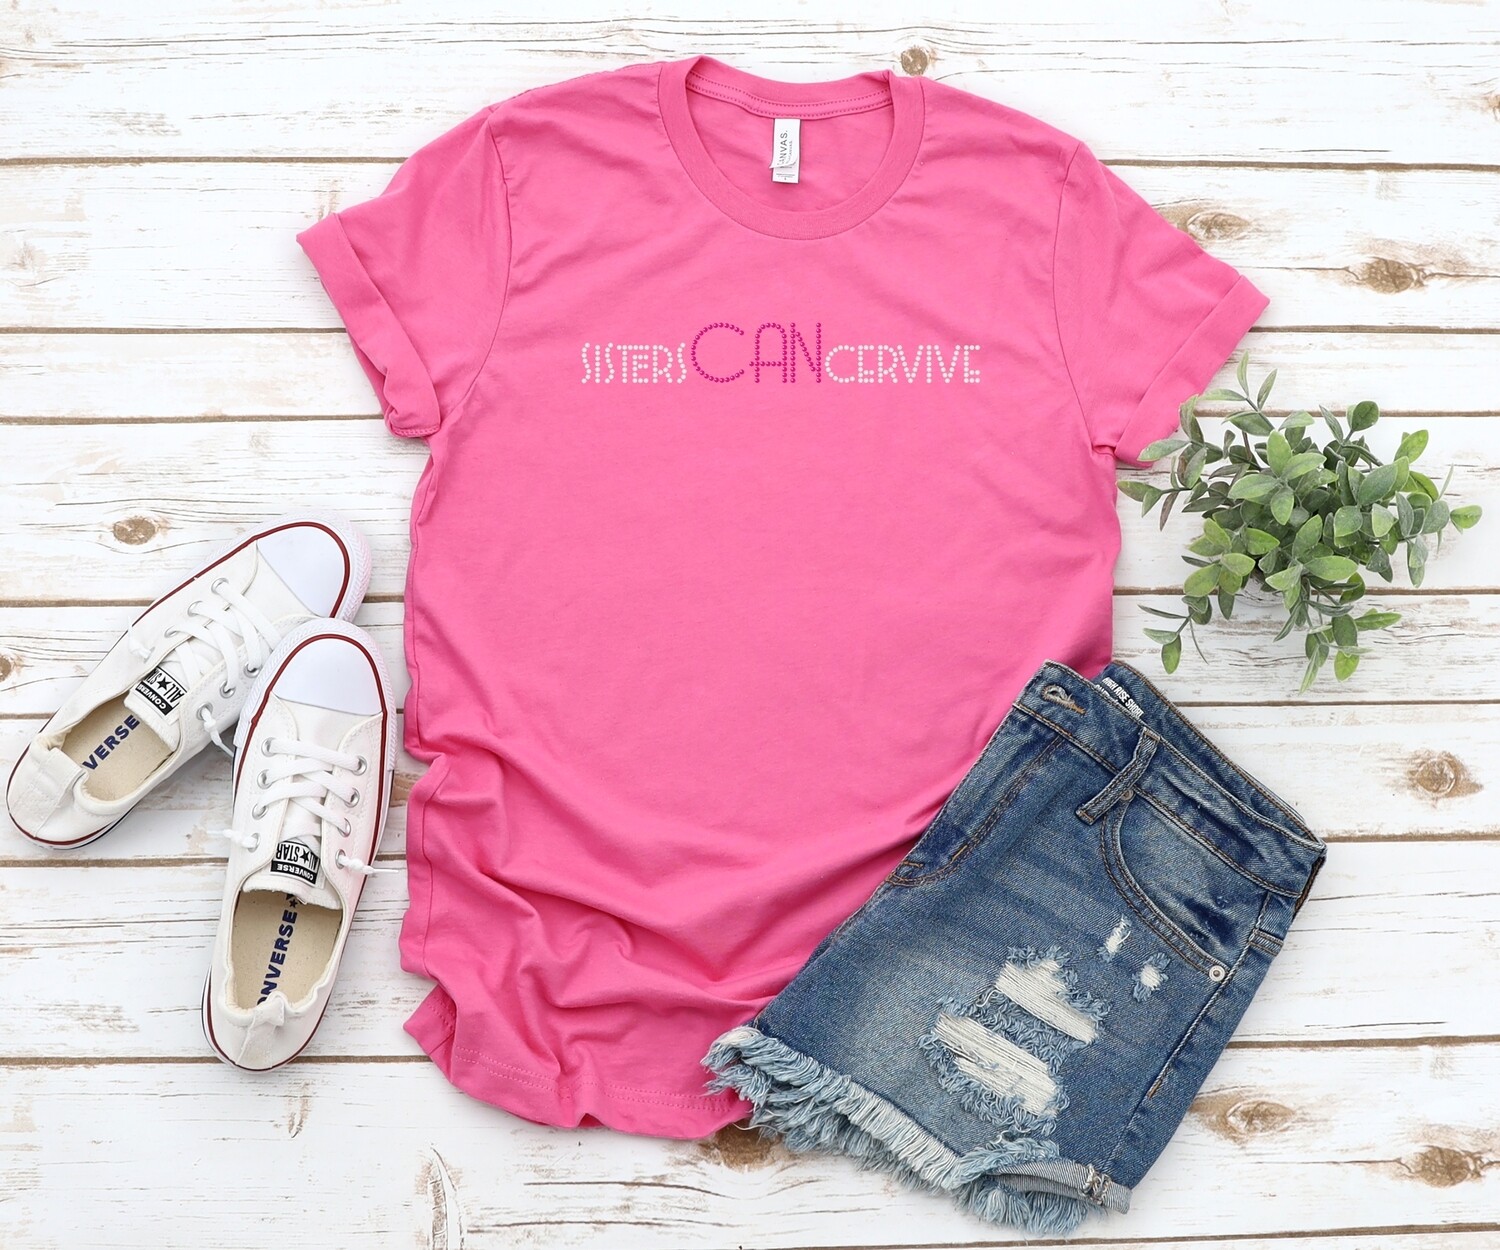 SISTERS CANcervive PINKED-OUT Shirt MEMBERS ONLY